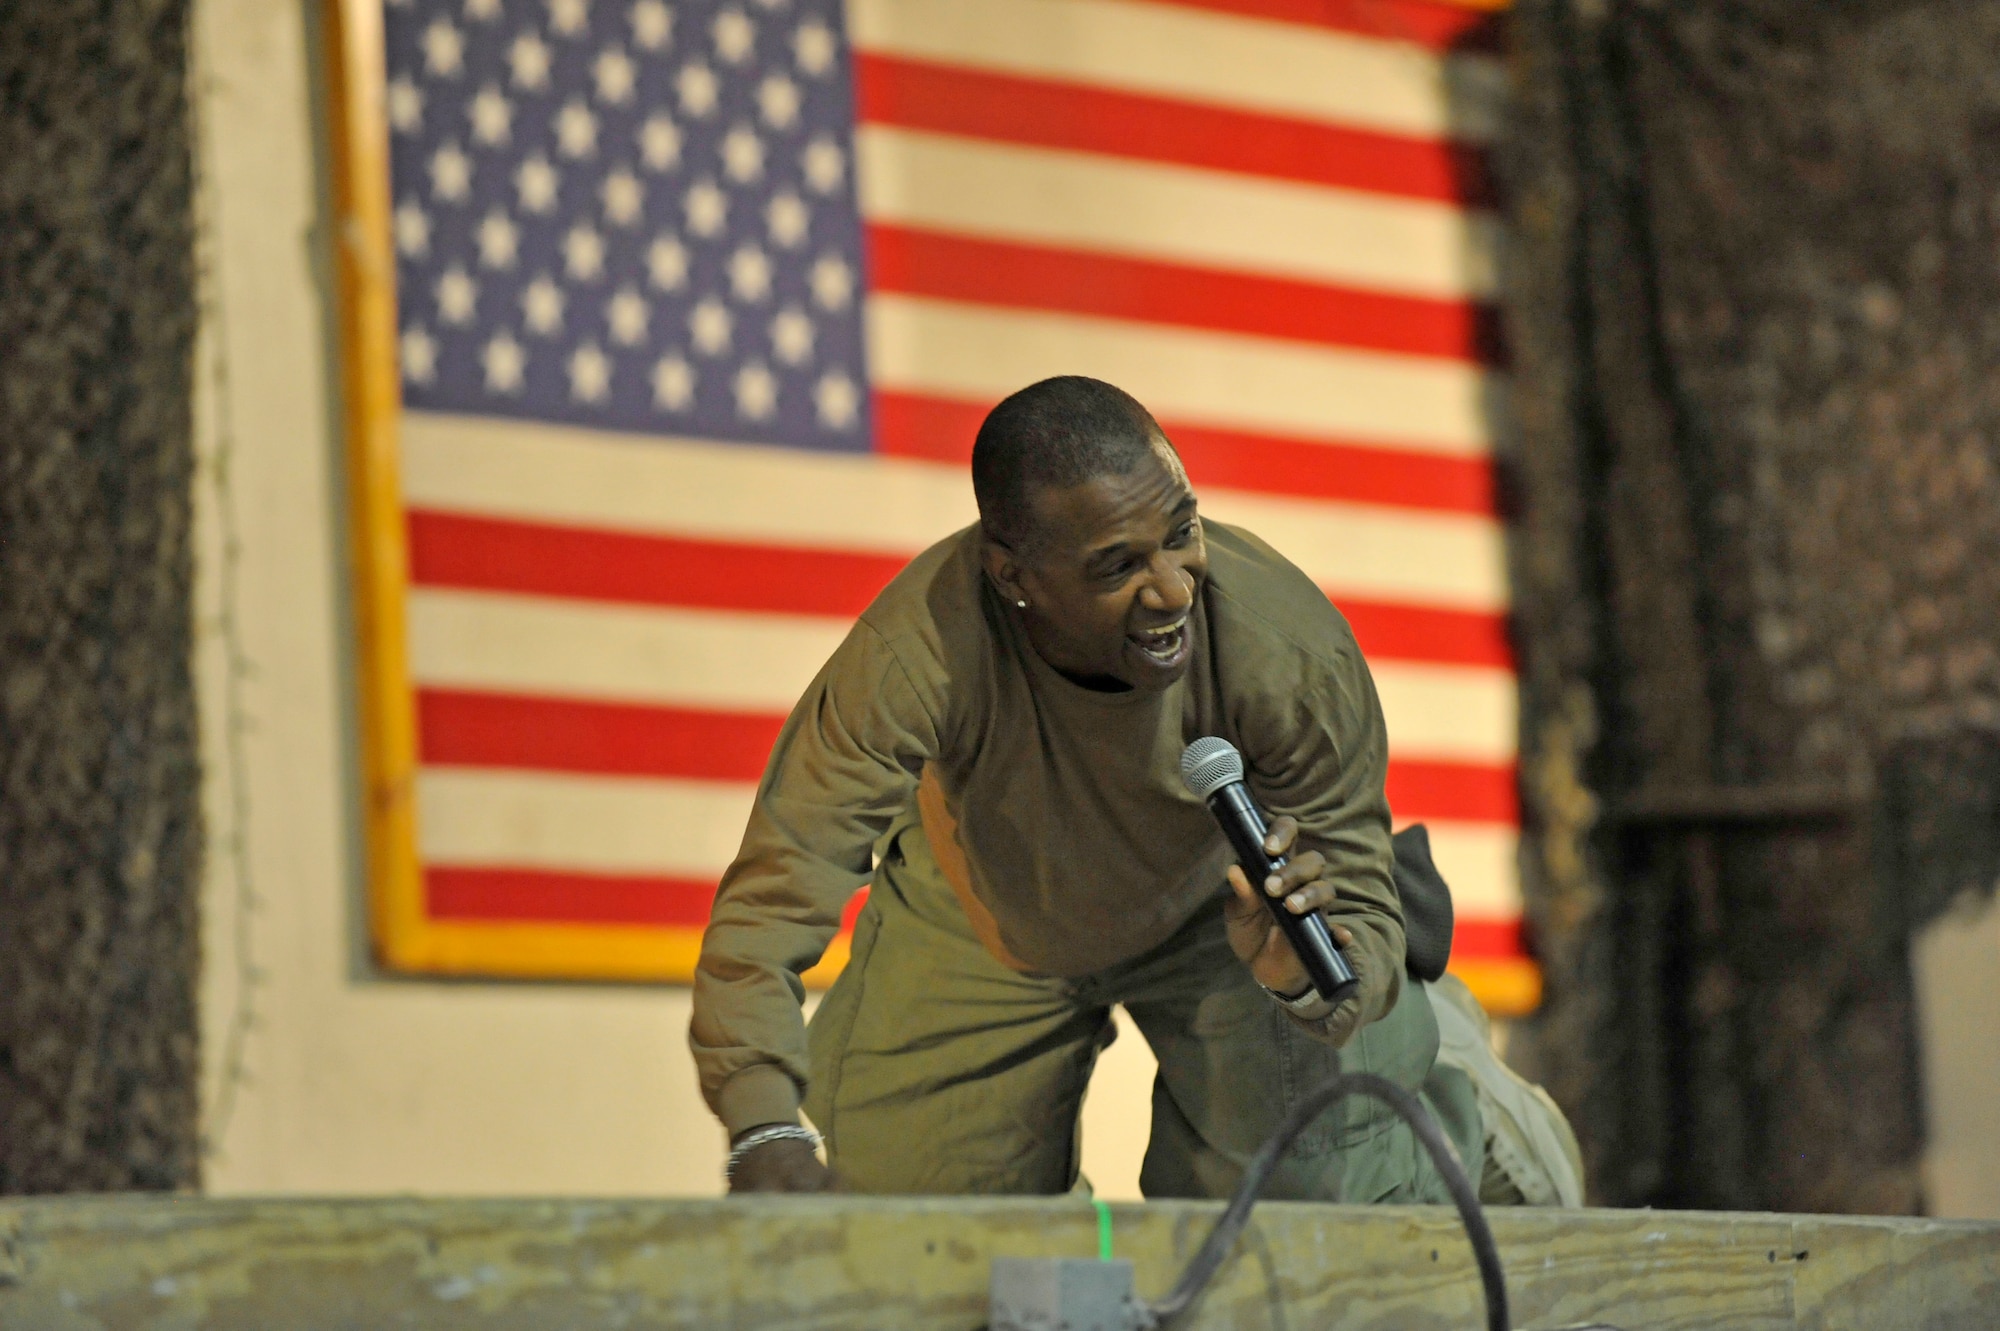 Comedian Tommy Davidson gets low and shows what he would do if he received indirect fire during his comedy tour at Bagram Airfield, Afghanistan, Dec. 31, 2013. Davidson performed a comedy routine for deployed Service members on New Year's Eve.(U.S. Air Force photo by Senior Master Sgt. Gary J. Rihn/Released)